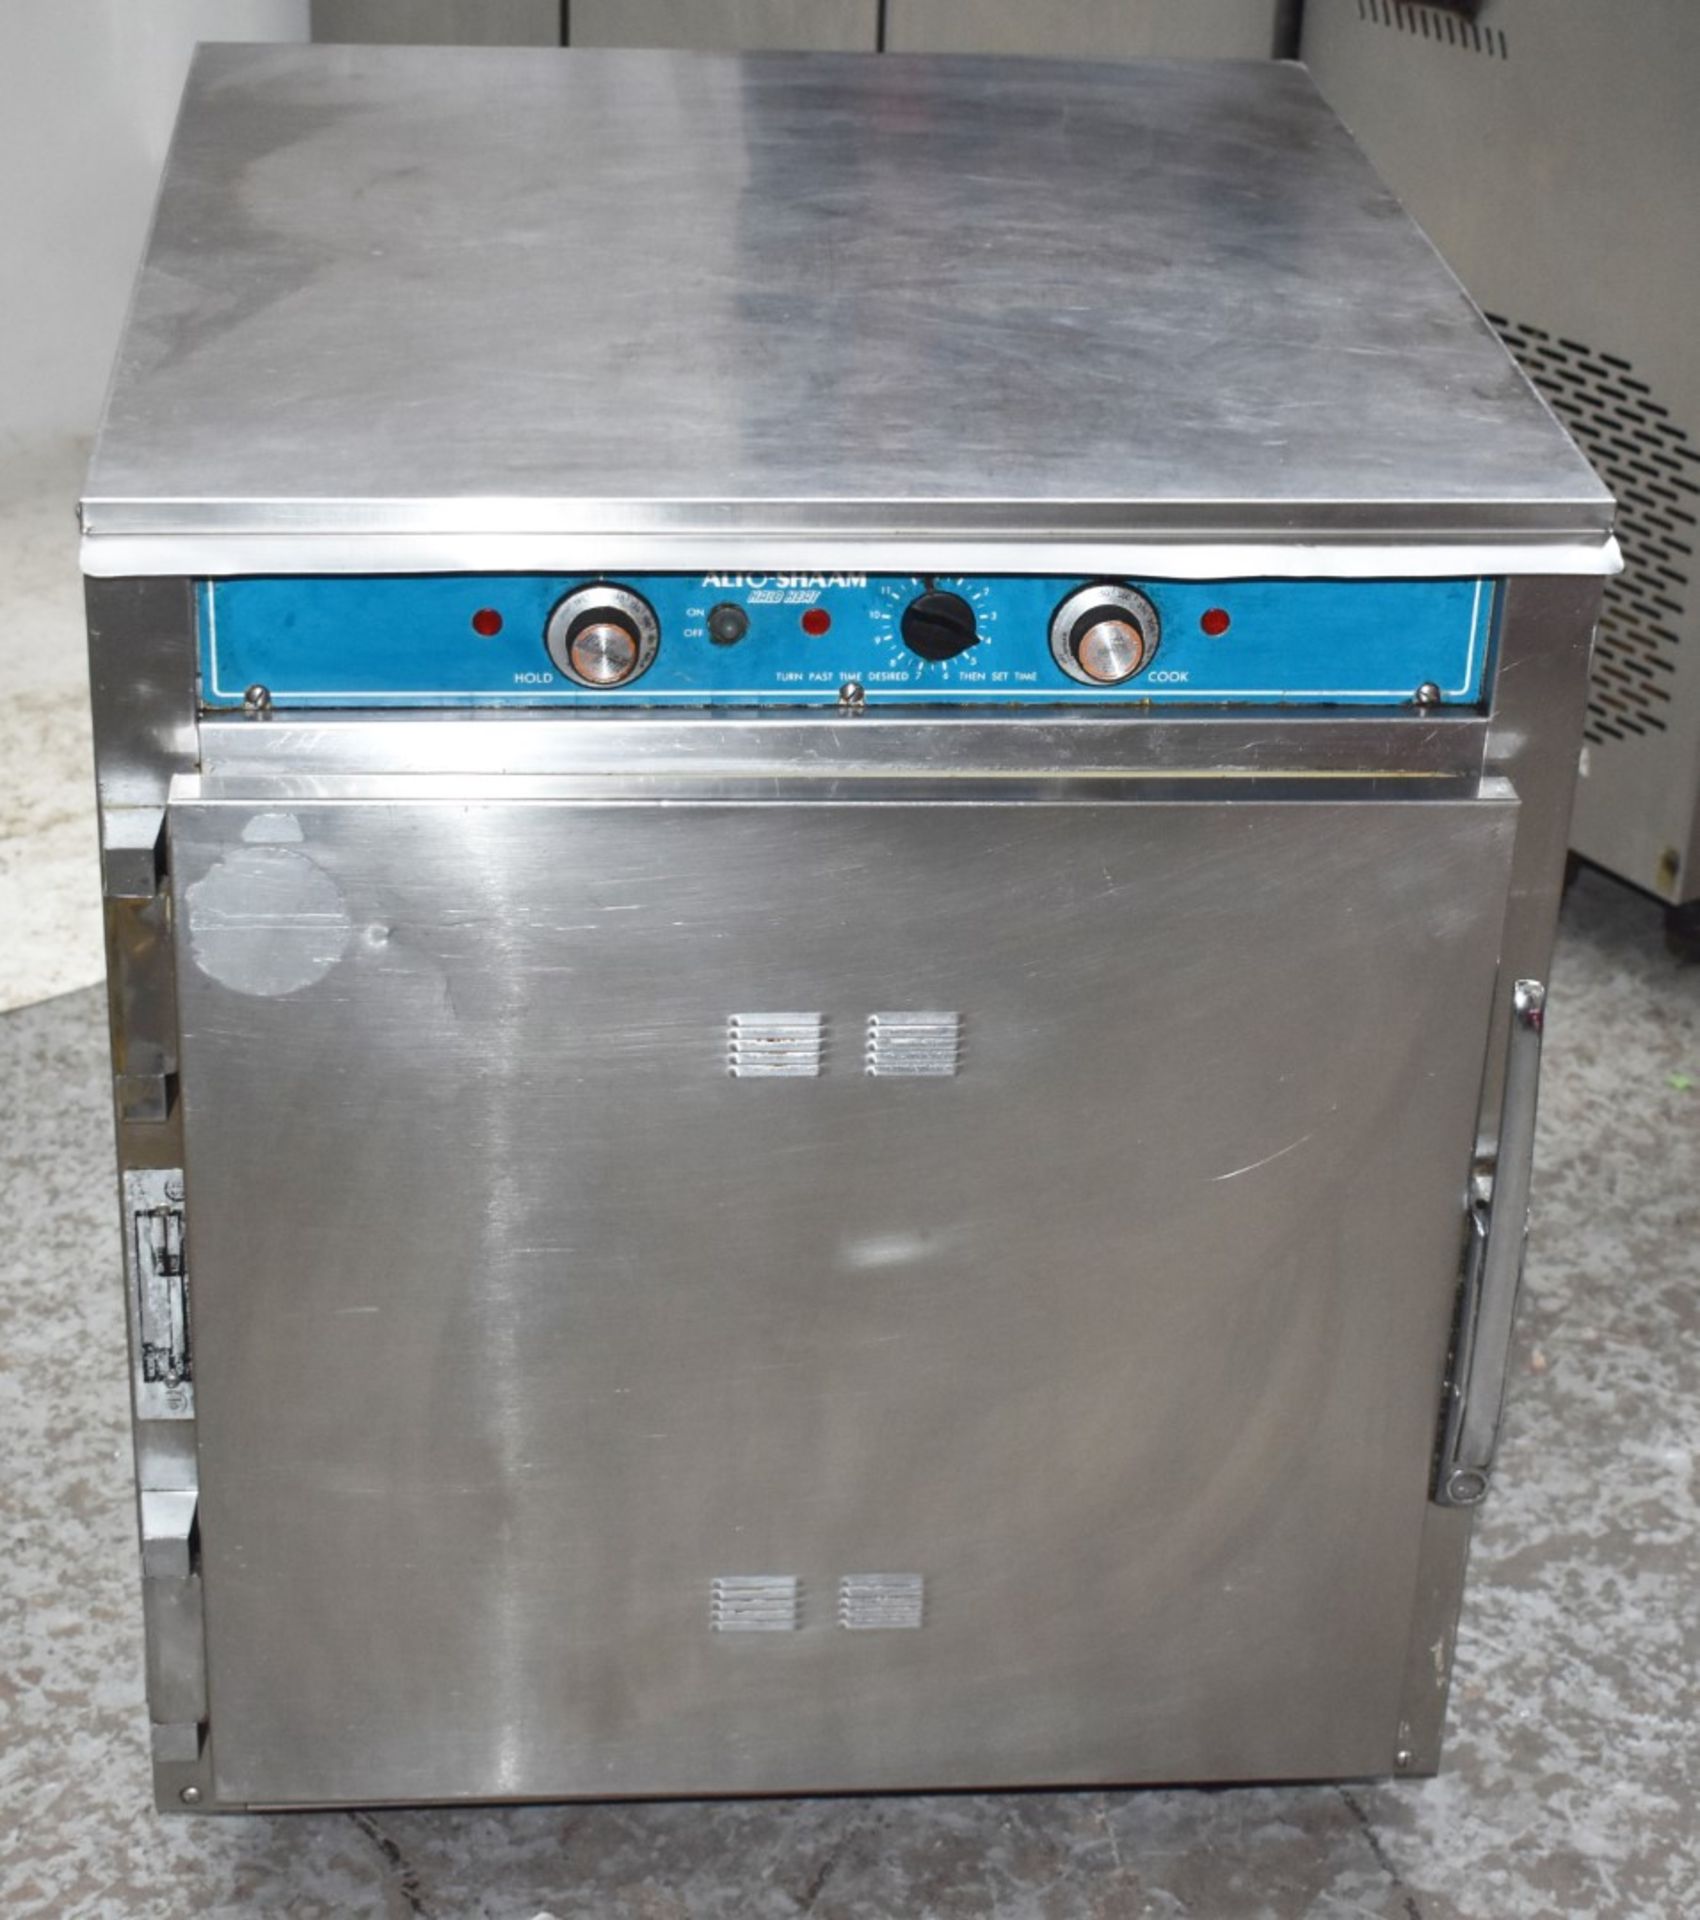 1 x Auto-Shaan Halo Heat Cook and Hold Food Cabinet - 240v - H76 x W65 x D75 cms - CL459 - - Image 7 of 7